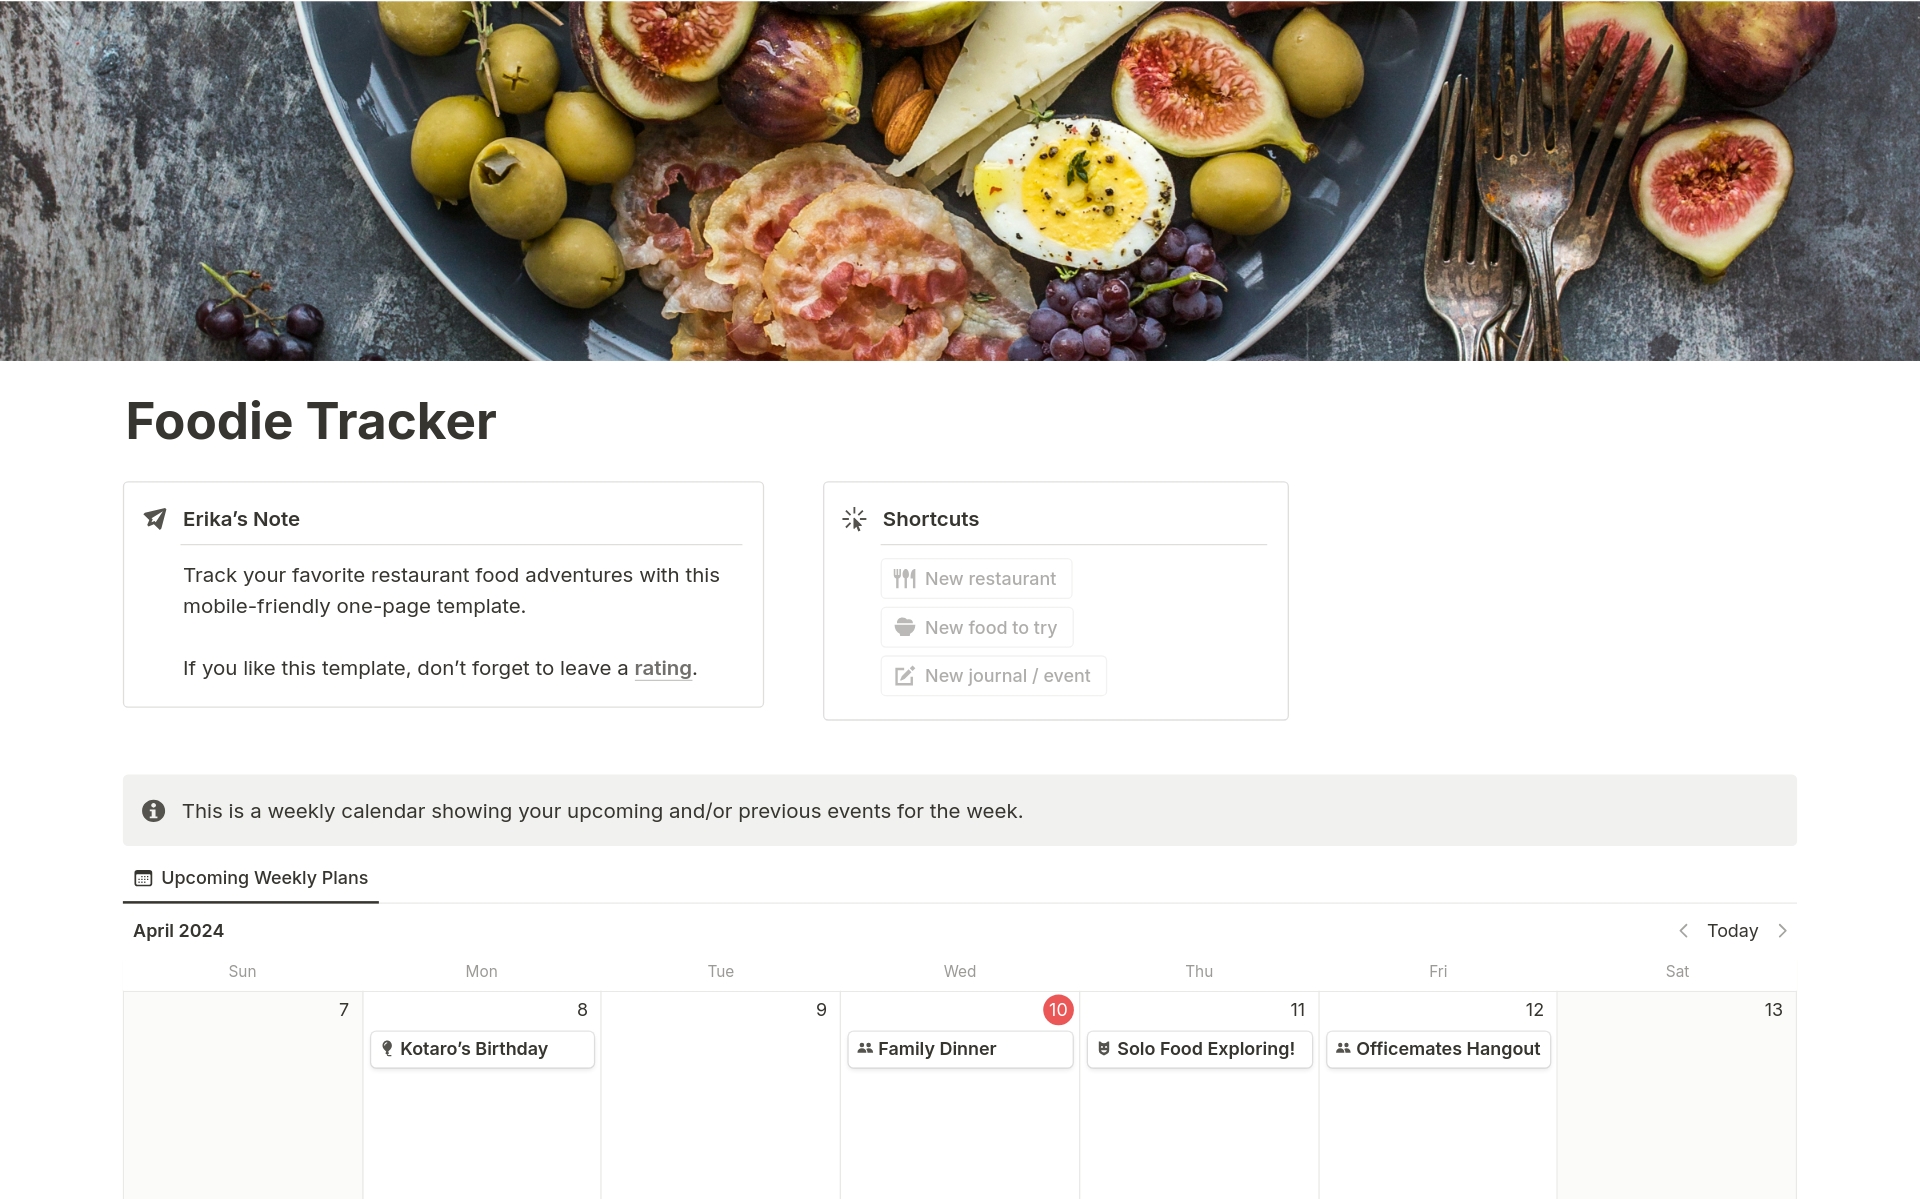 Track your favorite restaurant food adventures with this mobile-friendly one-page template.